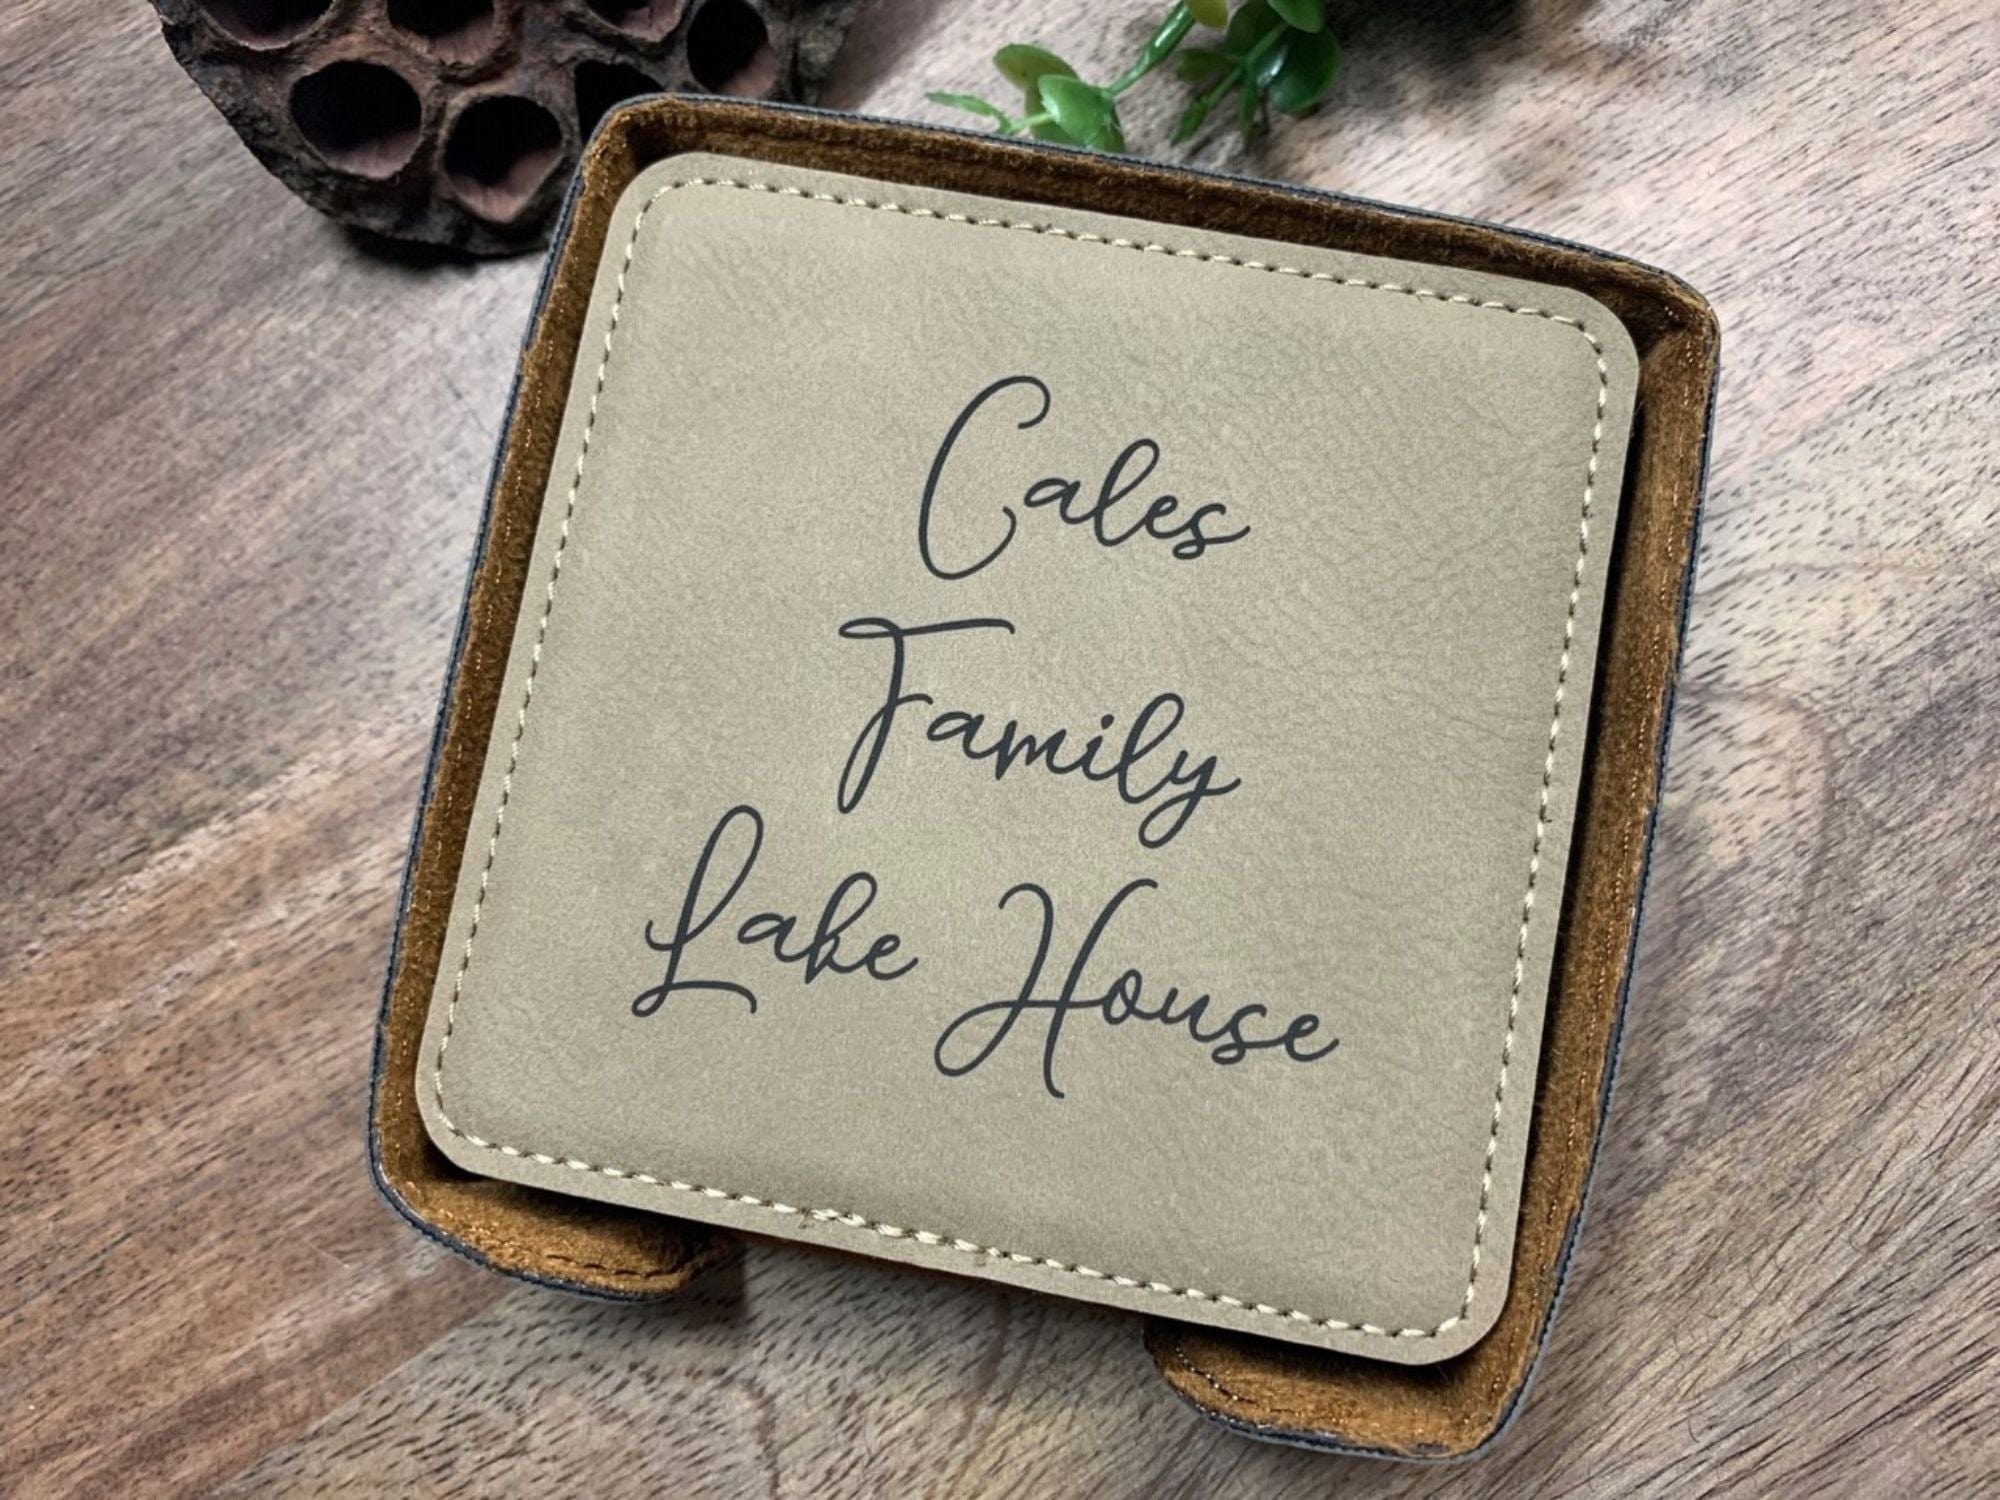 Lake House Coaster Set Personalized With Family Name